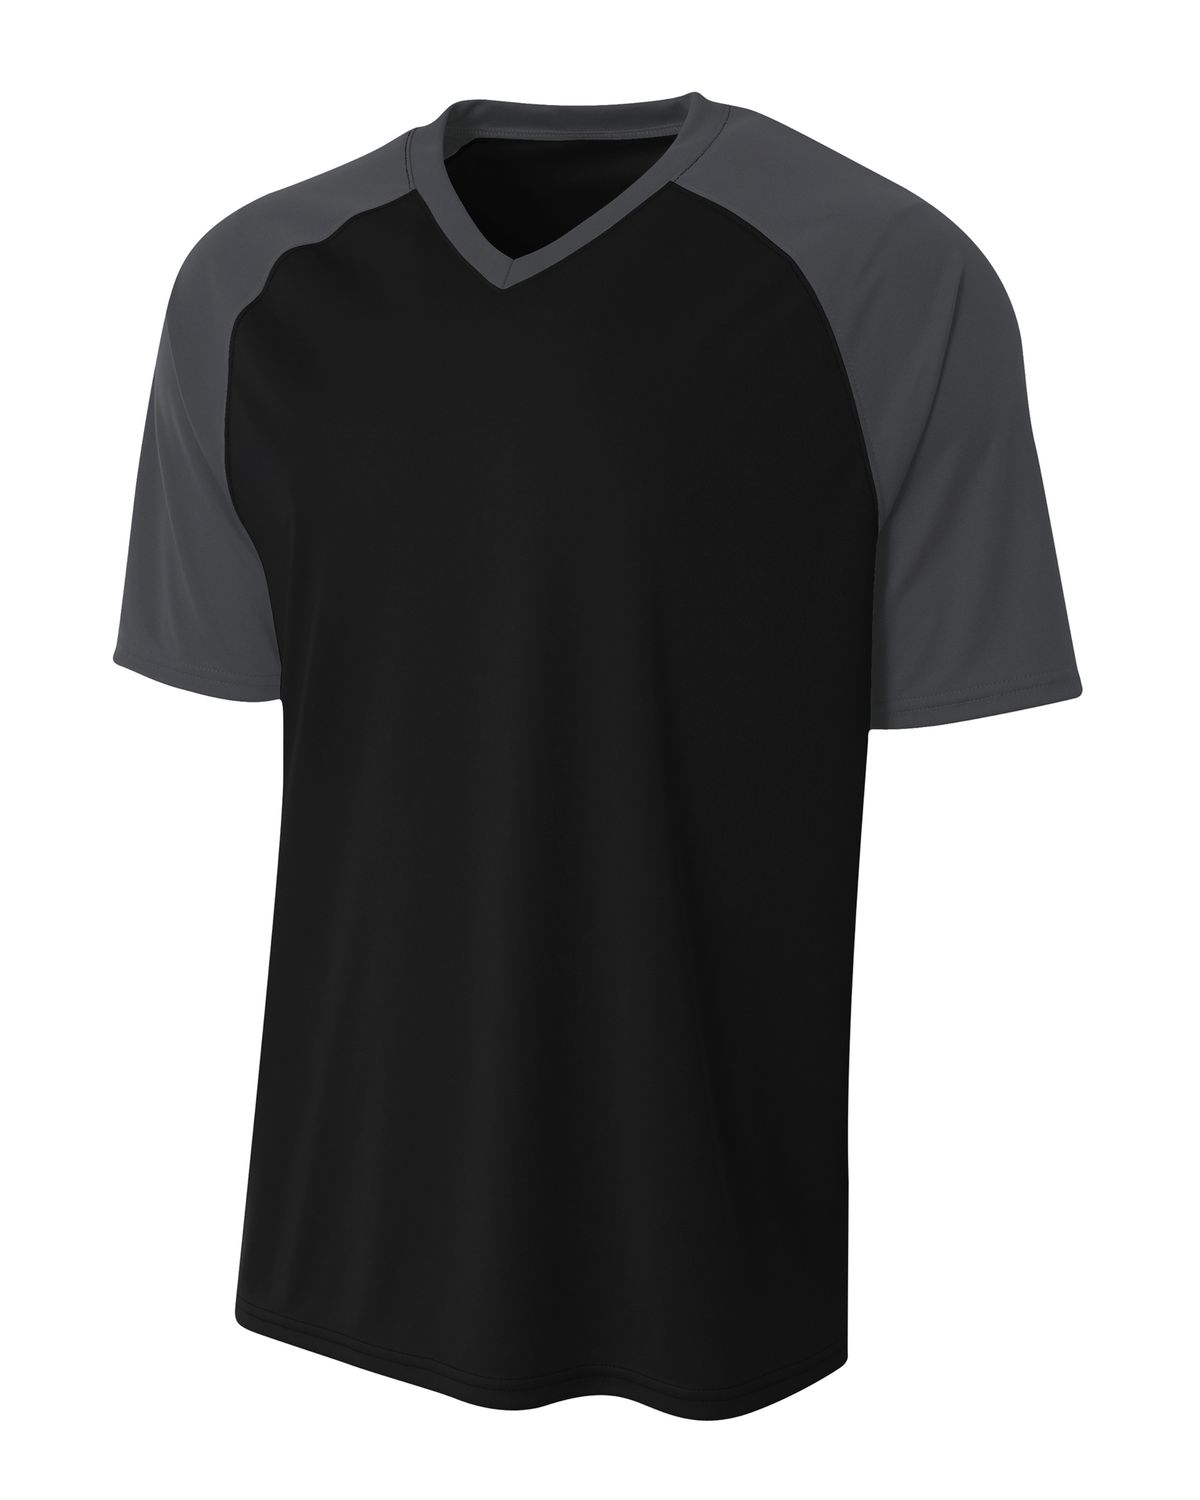 'A4 N3373 Adult Polyester V-Neck Strike Jersey with Contrast Sleeve'